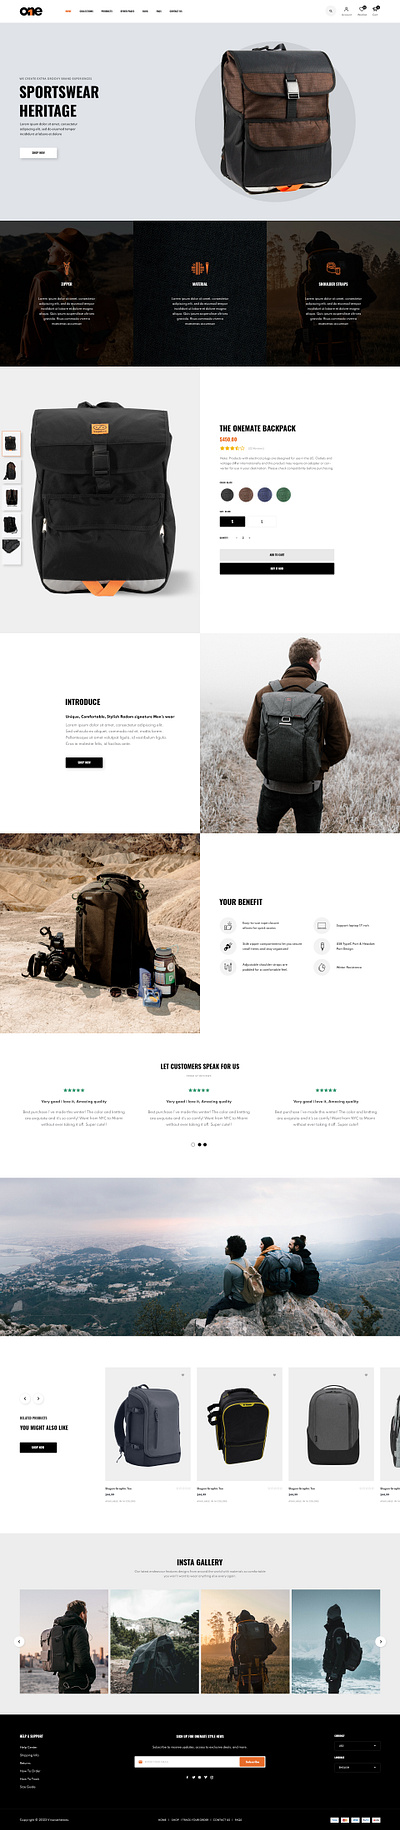 Mate - Single Product - Backpack Shopify Theme backpack website dropshipping envato landing page one product shopify shopify expert shopify store shopify template shopify theme single product themeforest web design web designer website design